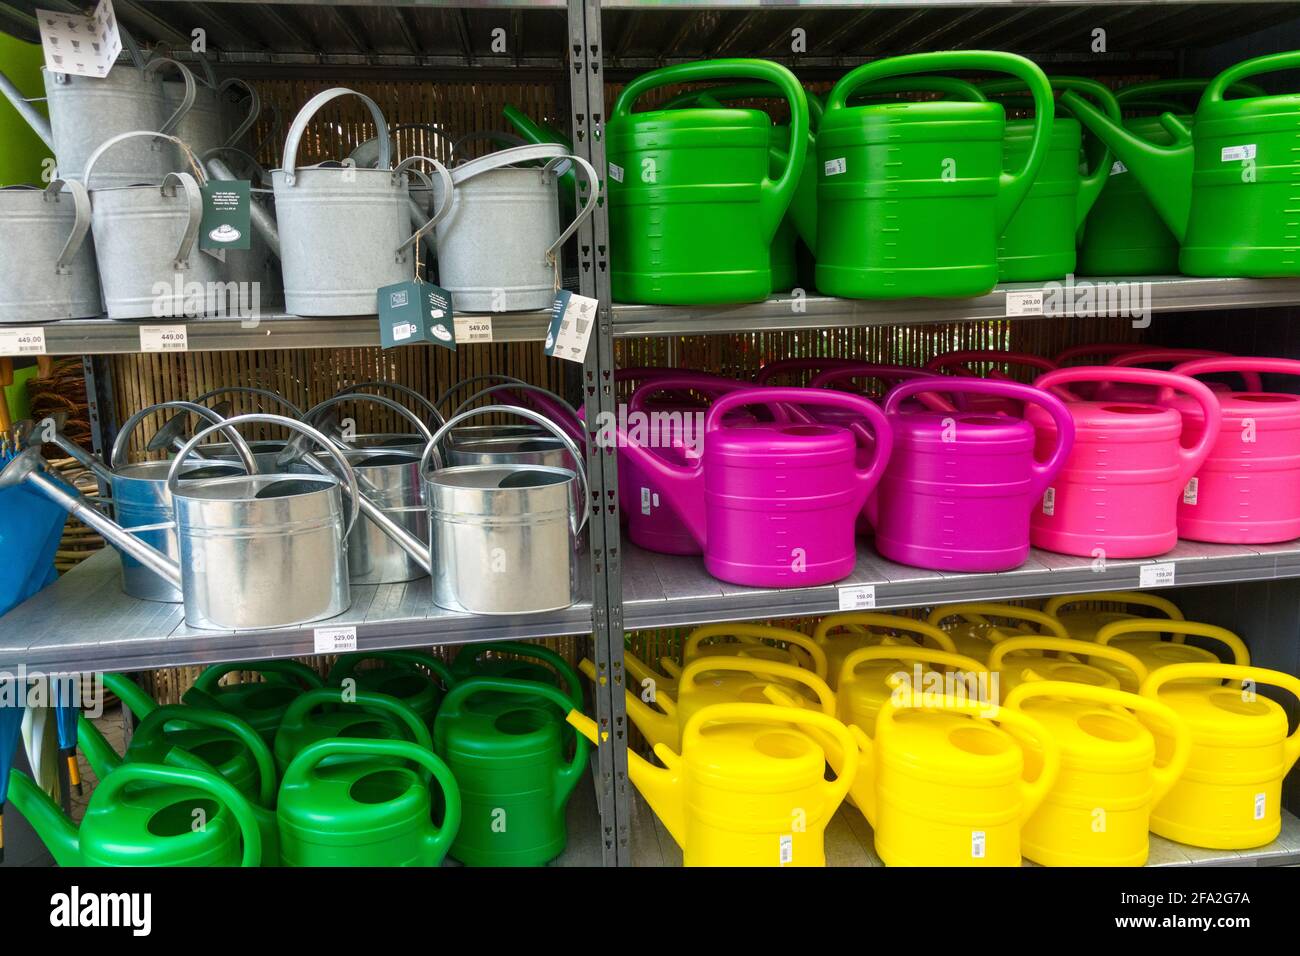 Watering cans for sale in shelves of garden centre Stock Photo